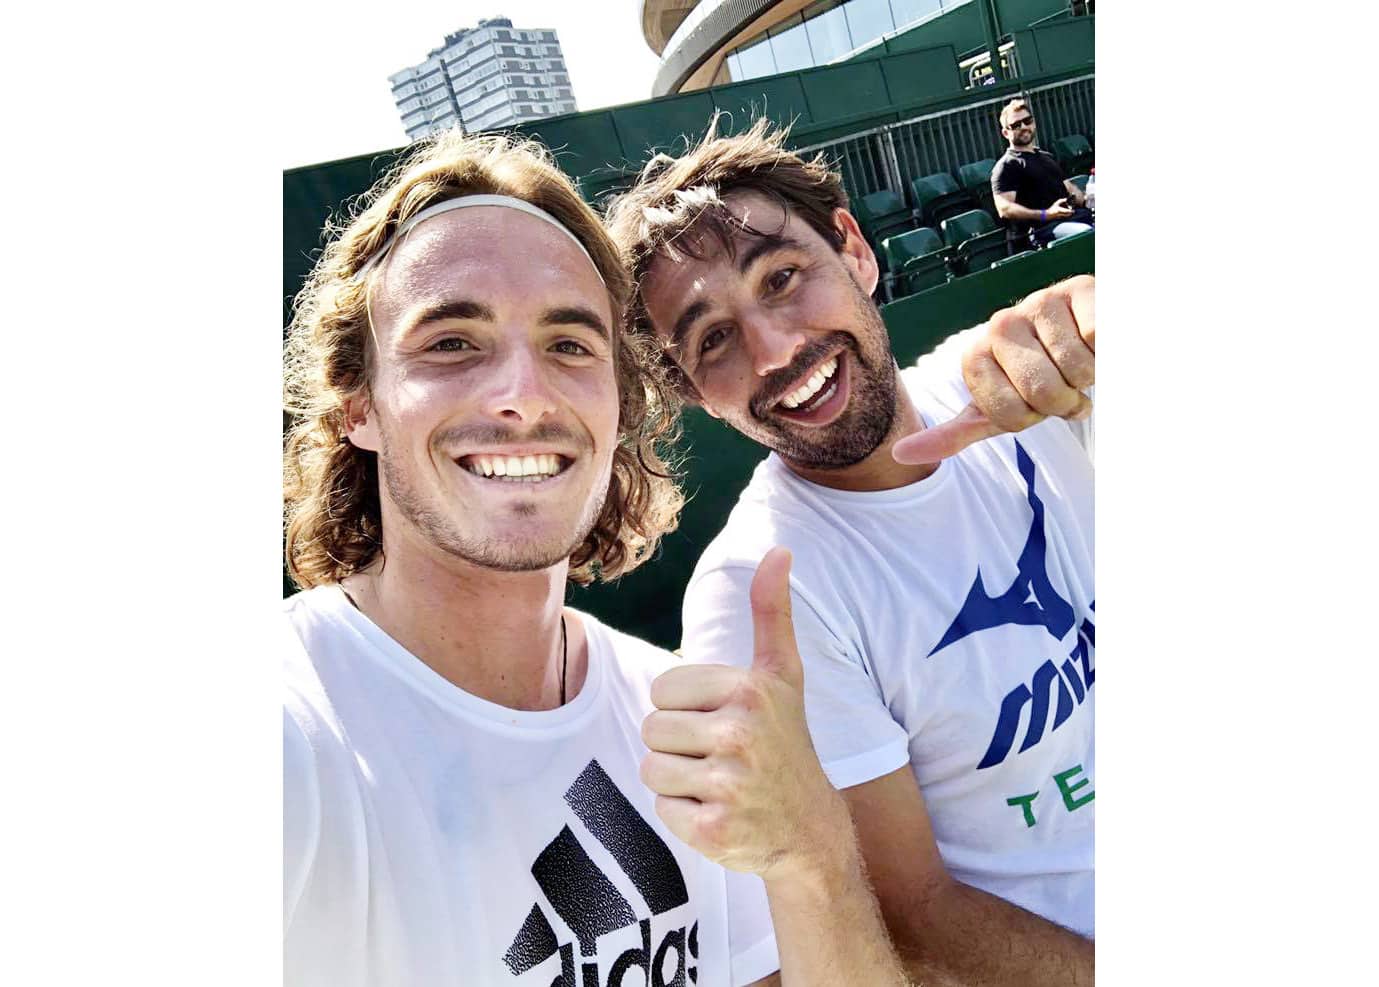 image Cyprus star Baghdatis was a role model, says Tsitsipas